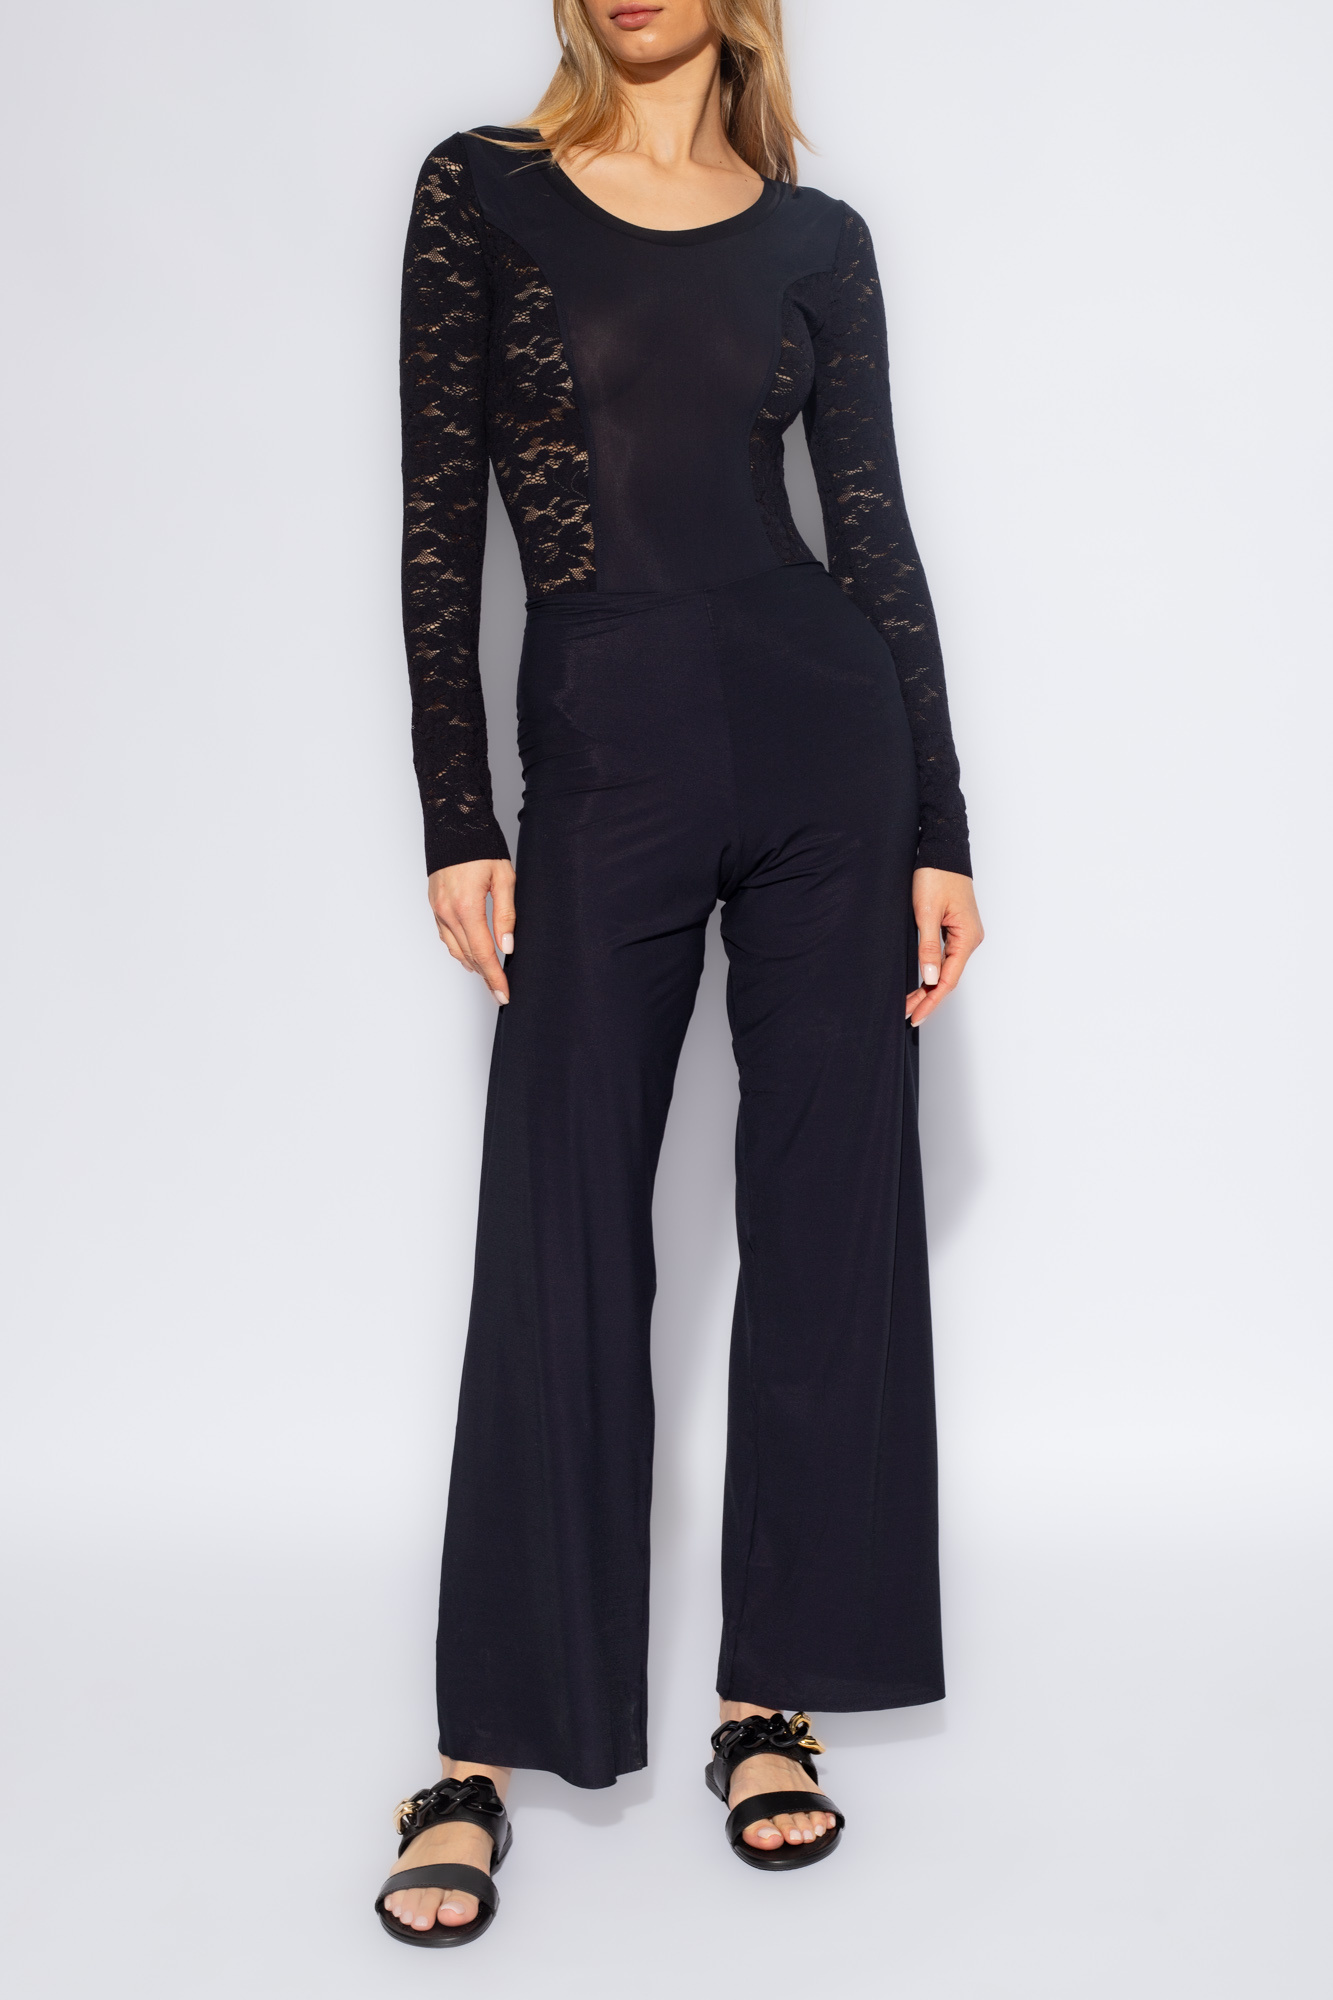 Discover styling suggestions that are perfect for the most anticipated parties ‘Bunny’ bodysuit